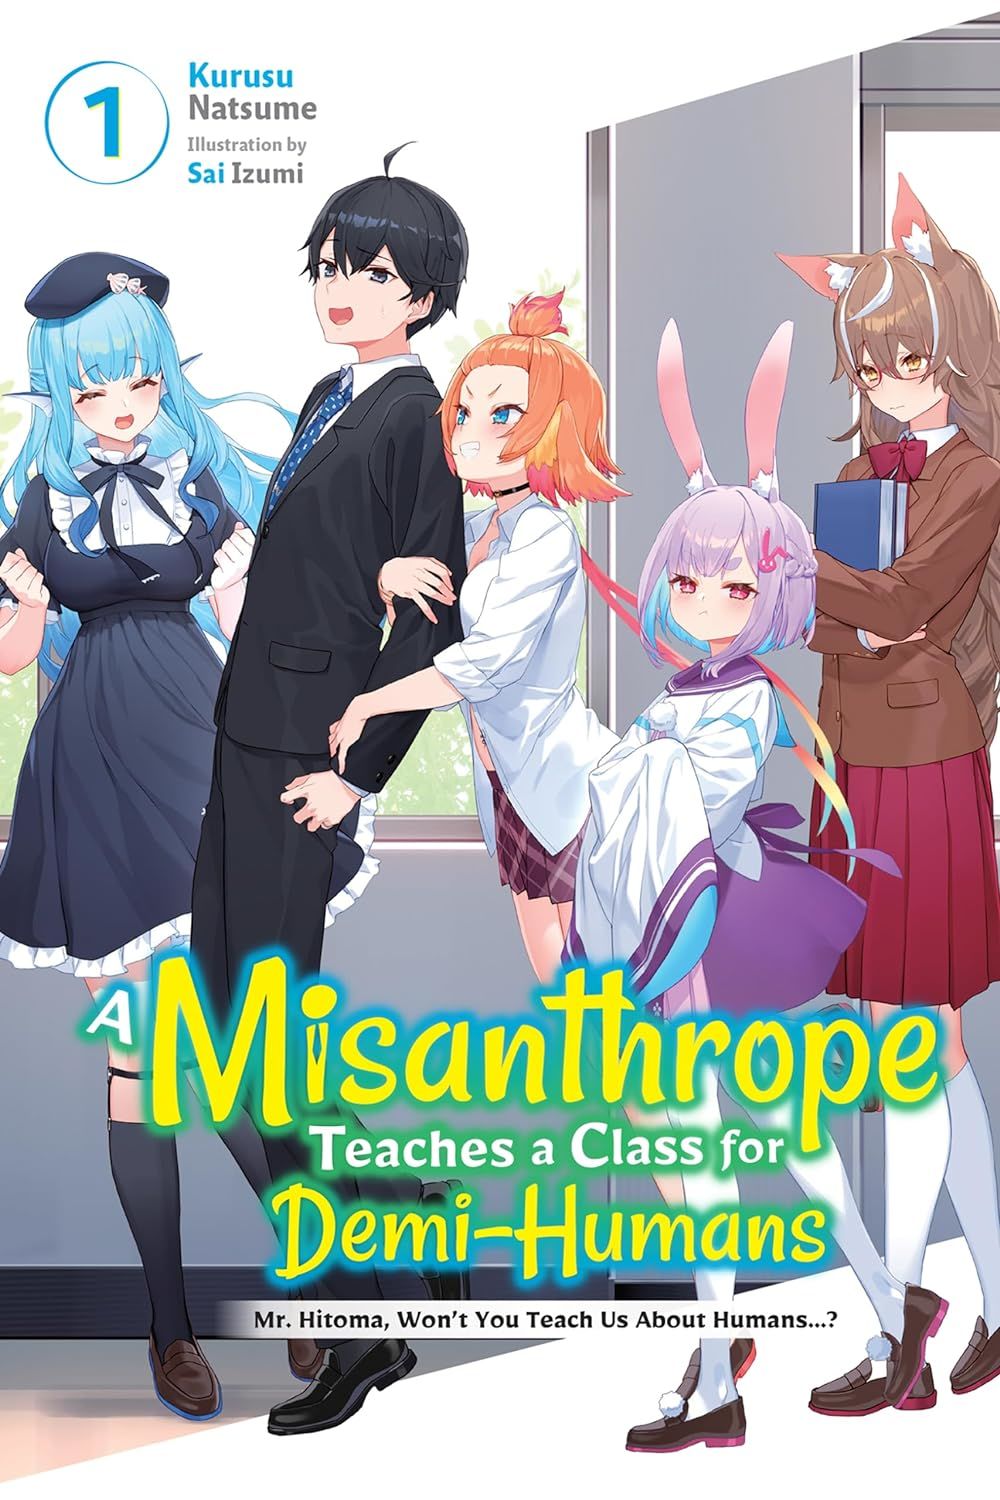 A Misanthrope Teaches a Class for Demi-Humans, Vol. 1: Mr. Hitoma, Won't You Teach Us about Humans...?